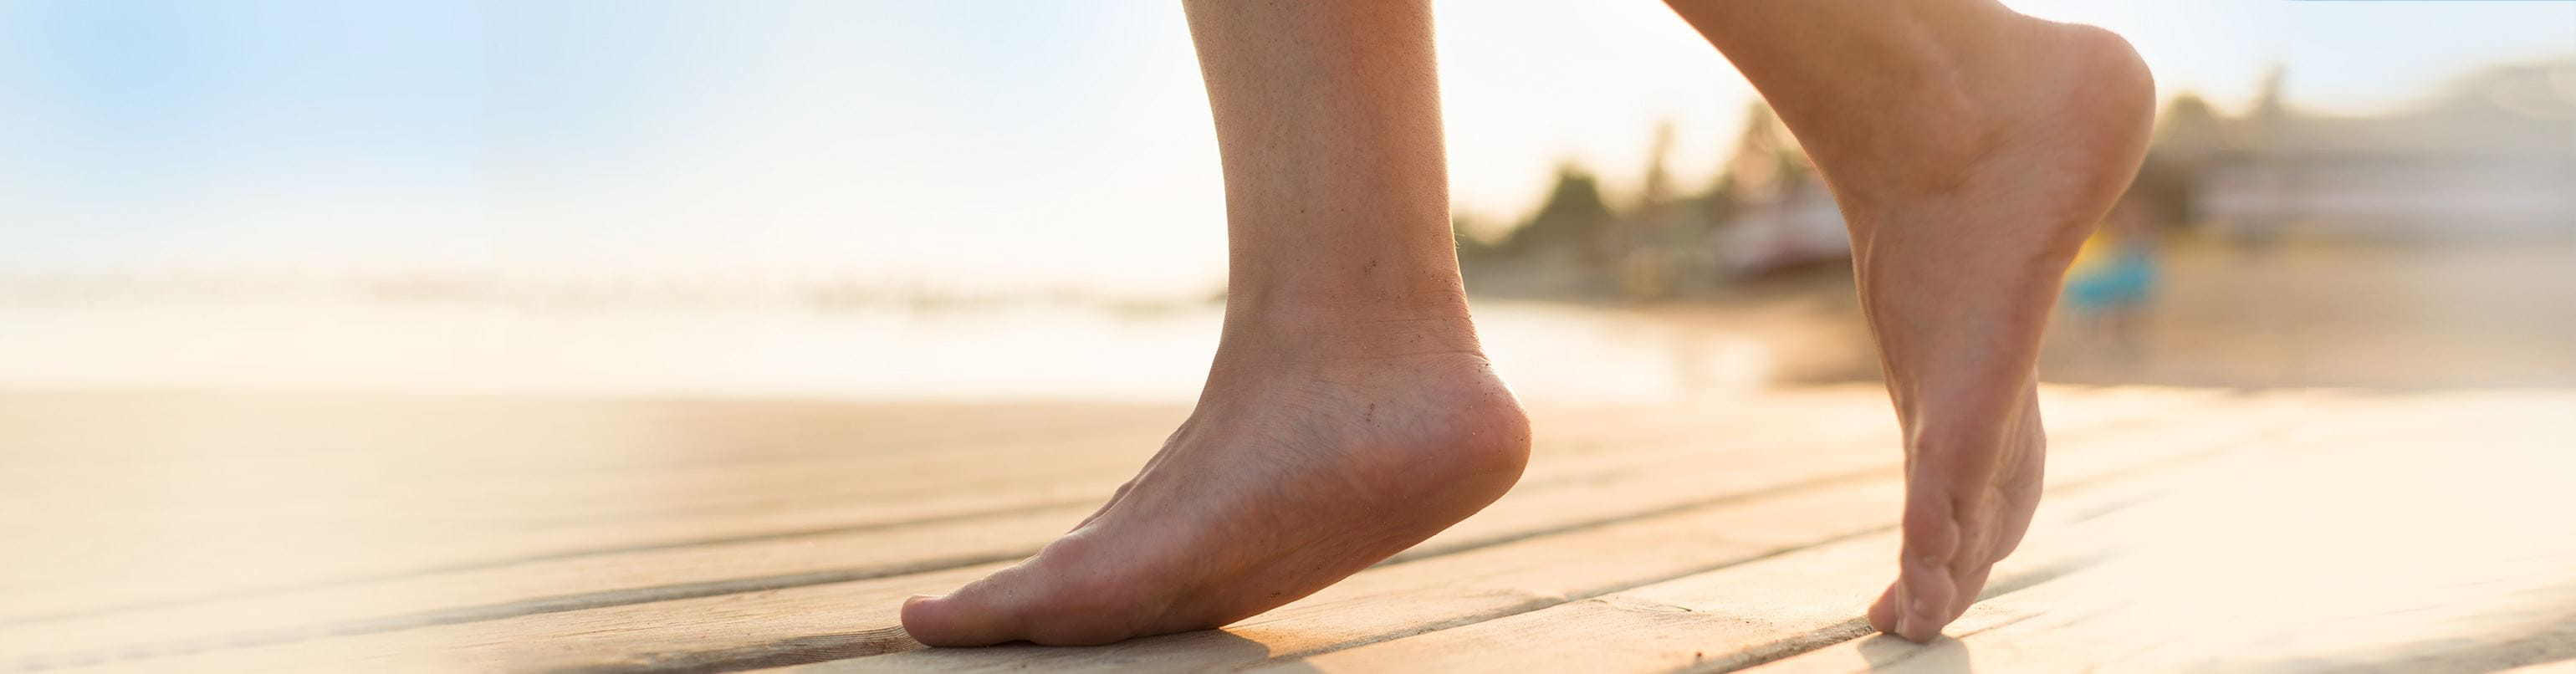 Little-known warning signs of dangerous liver problems that appear on your  feet - Chronicle Live